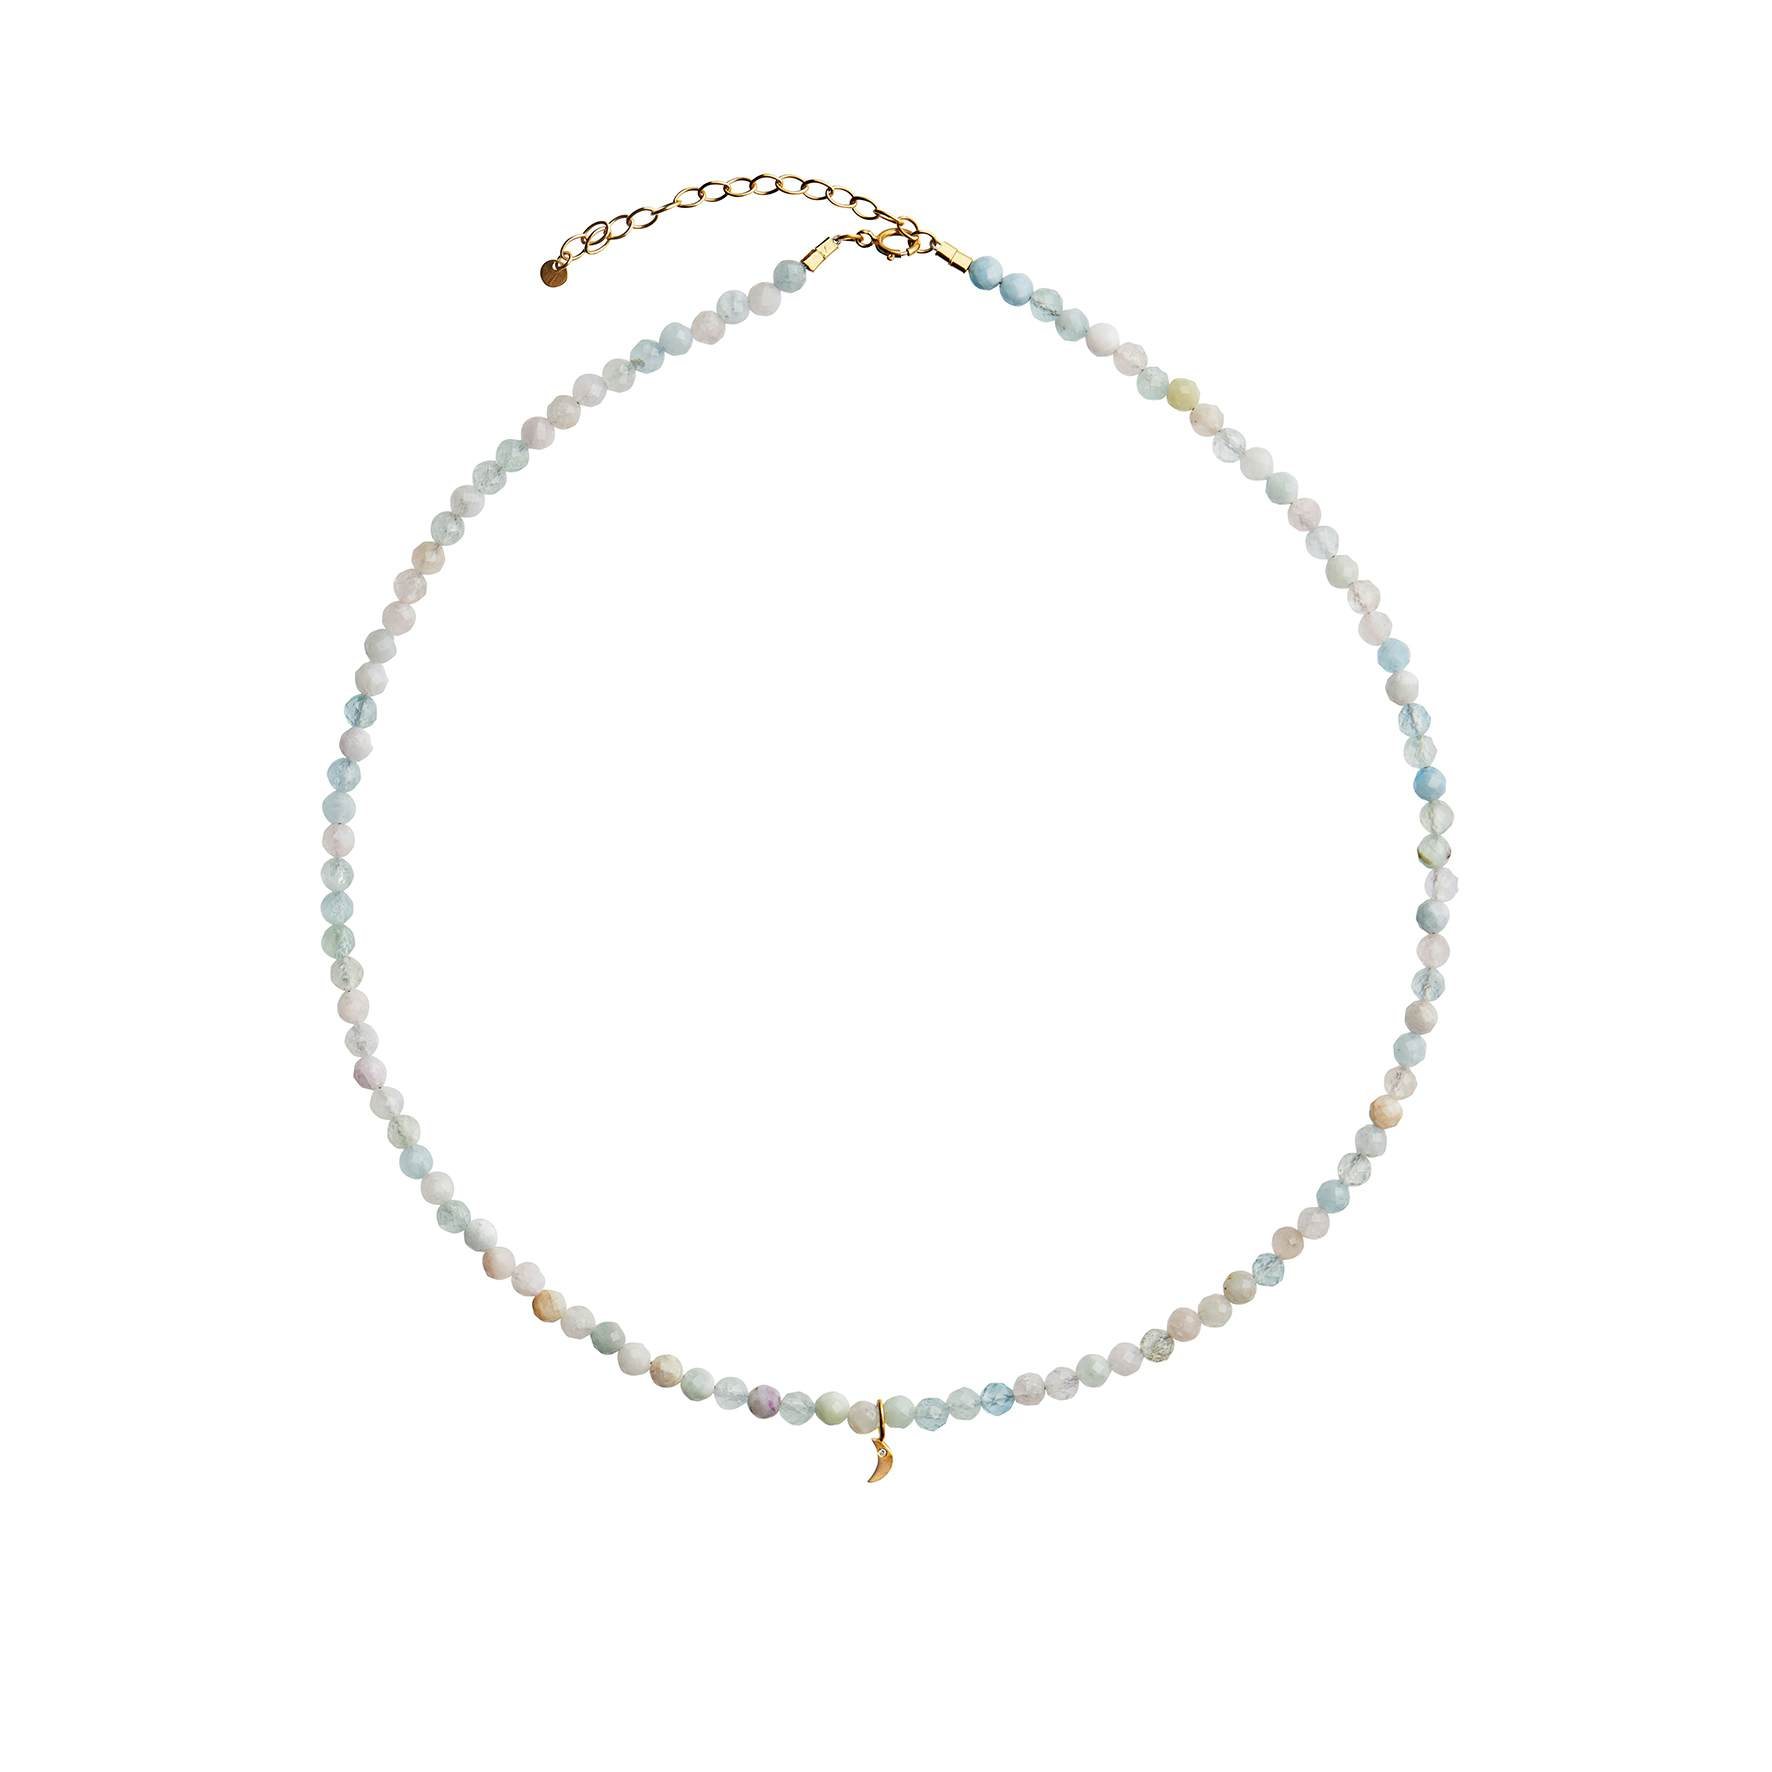 Soft Pastella With Tres Patit Moon Necklace from STINE A Jewelry in Goldplated-Silver Sterling 925